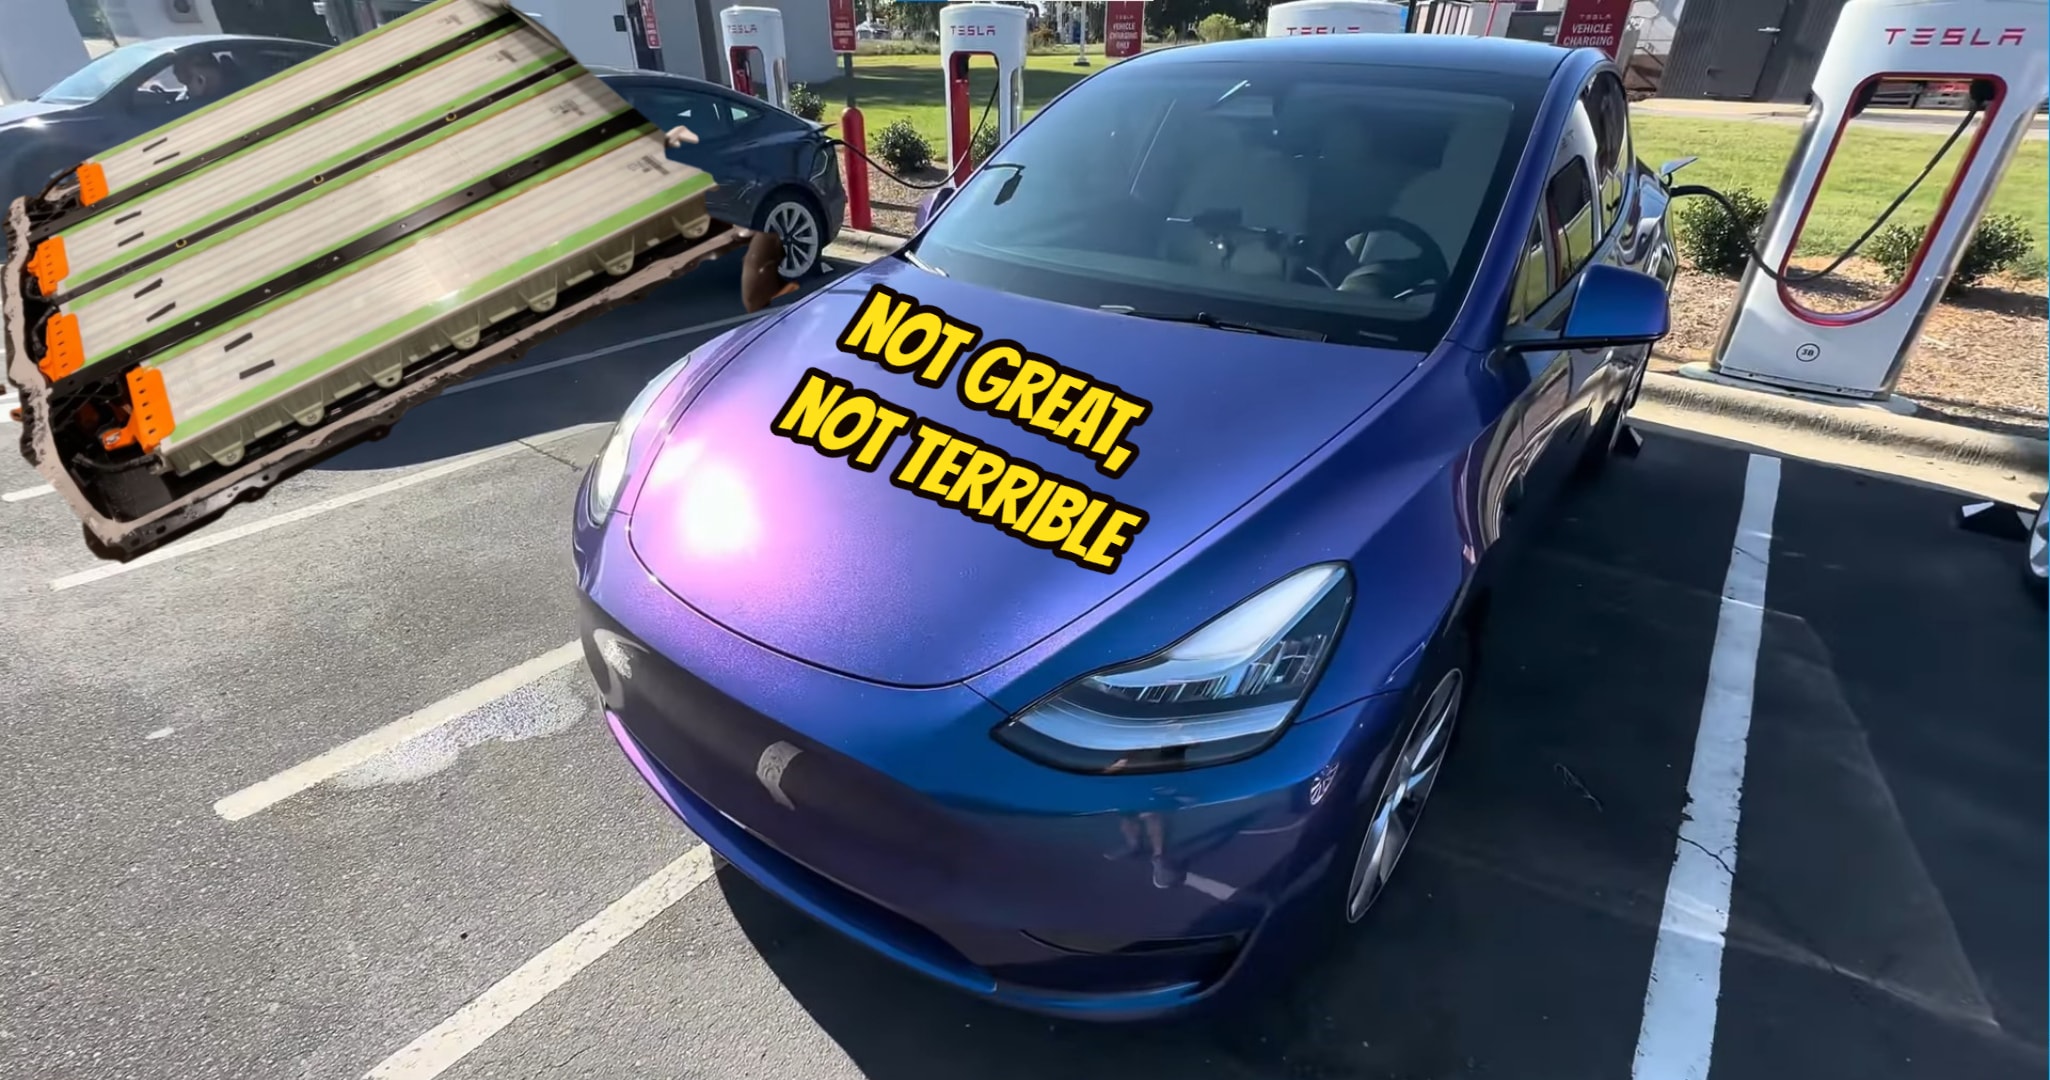 The Cheapest Tesla Model Y Just Disappeared—Why?